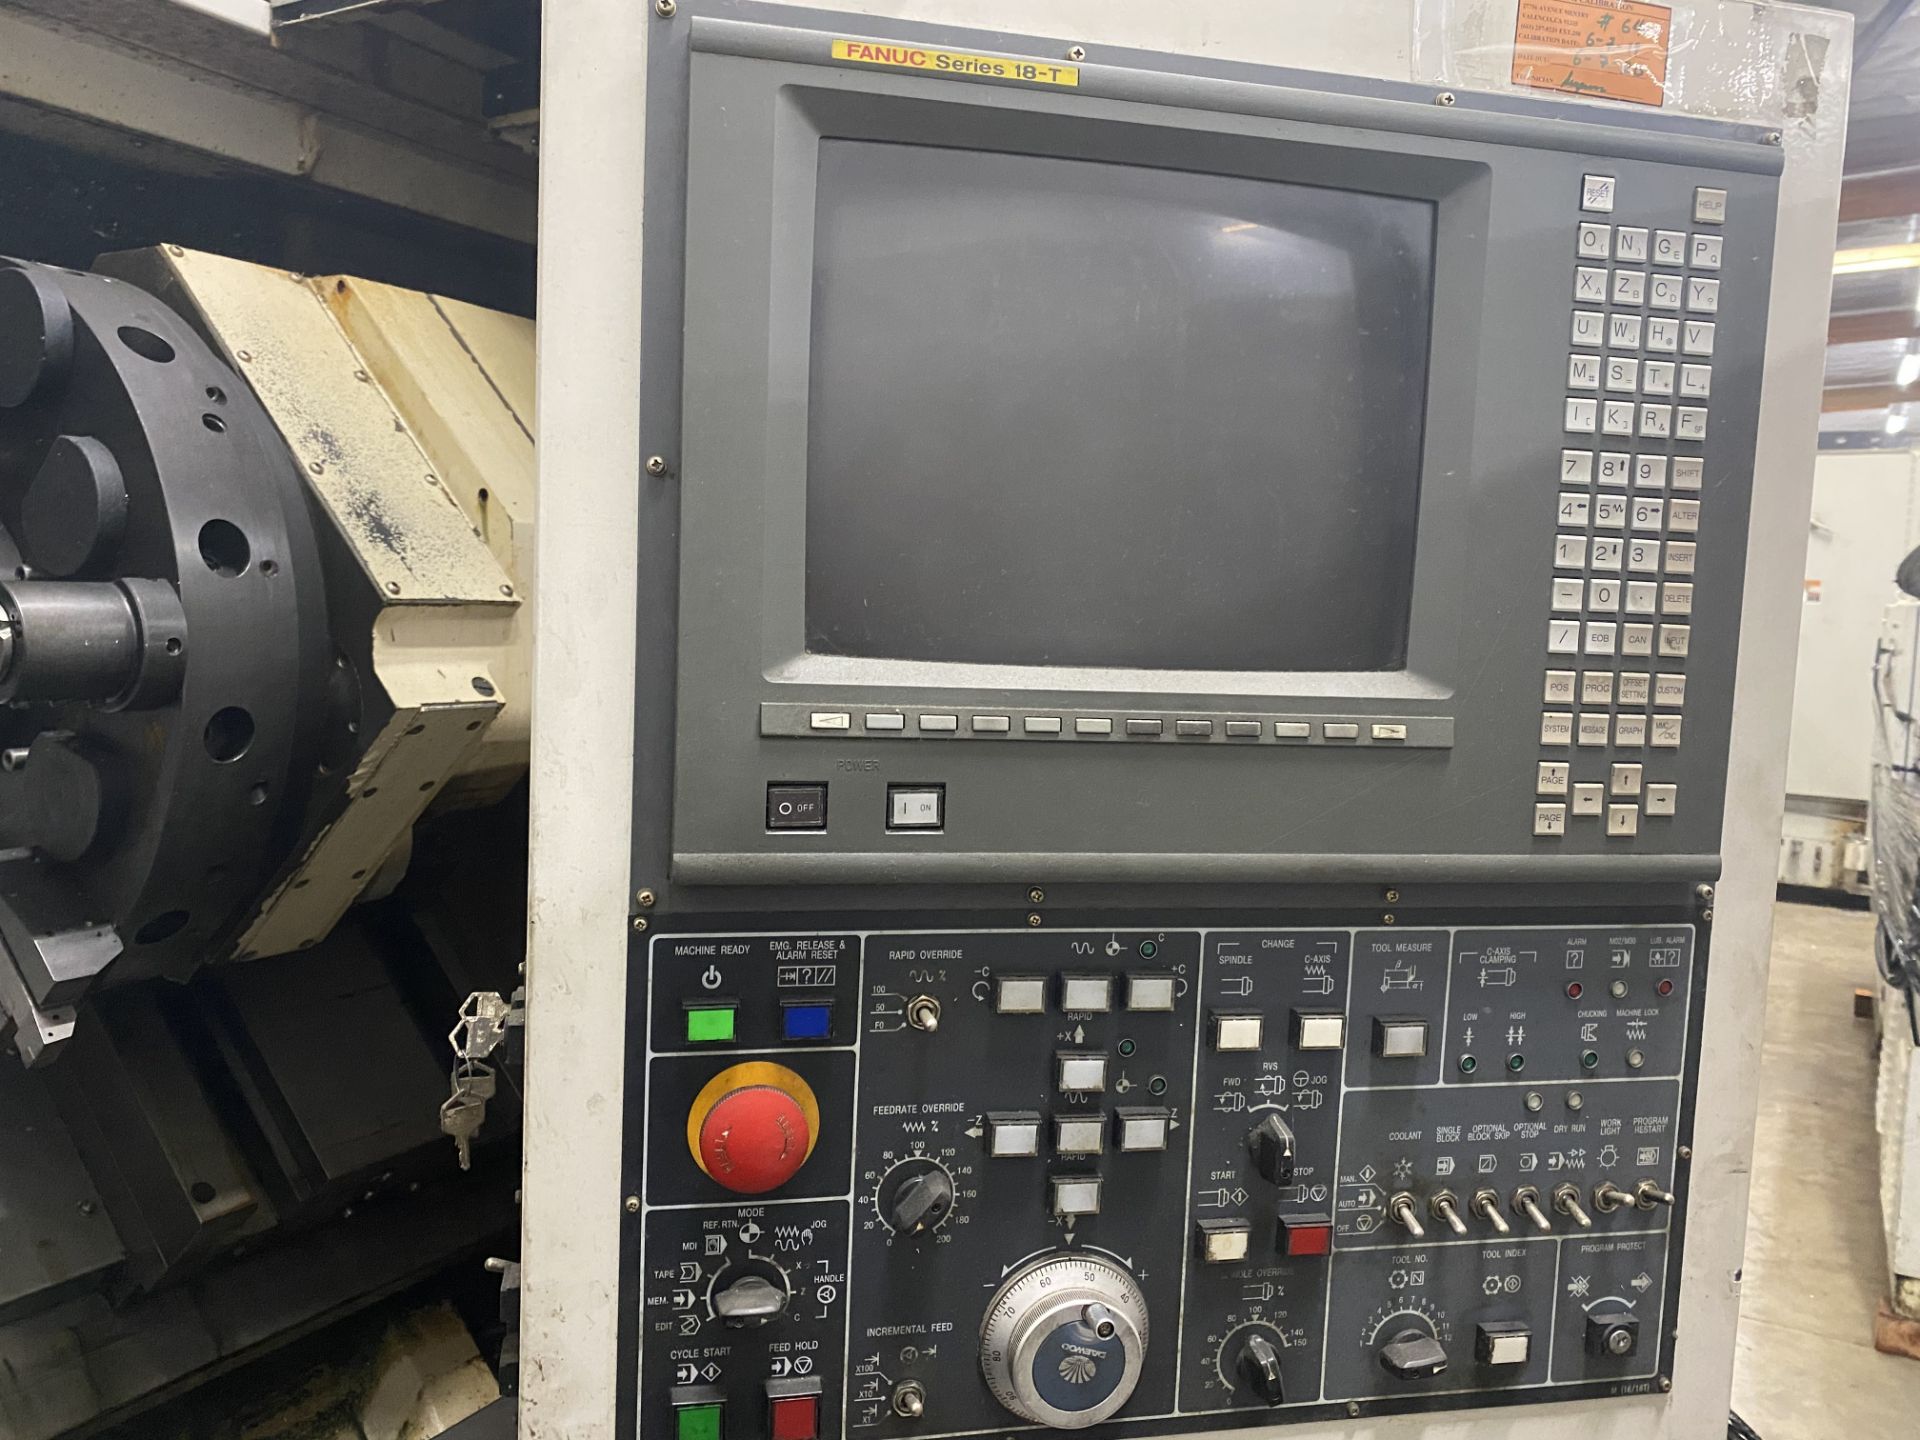 1999 Daewoo PUMA 350MA Live Turret CNC Turning Center s/n P35M0167 w/Fanuc 18-T Controls, SOLD AS IS - Image 3 of 10